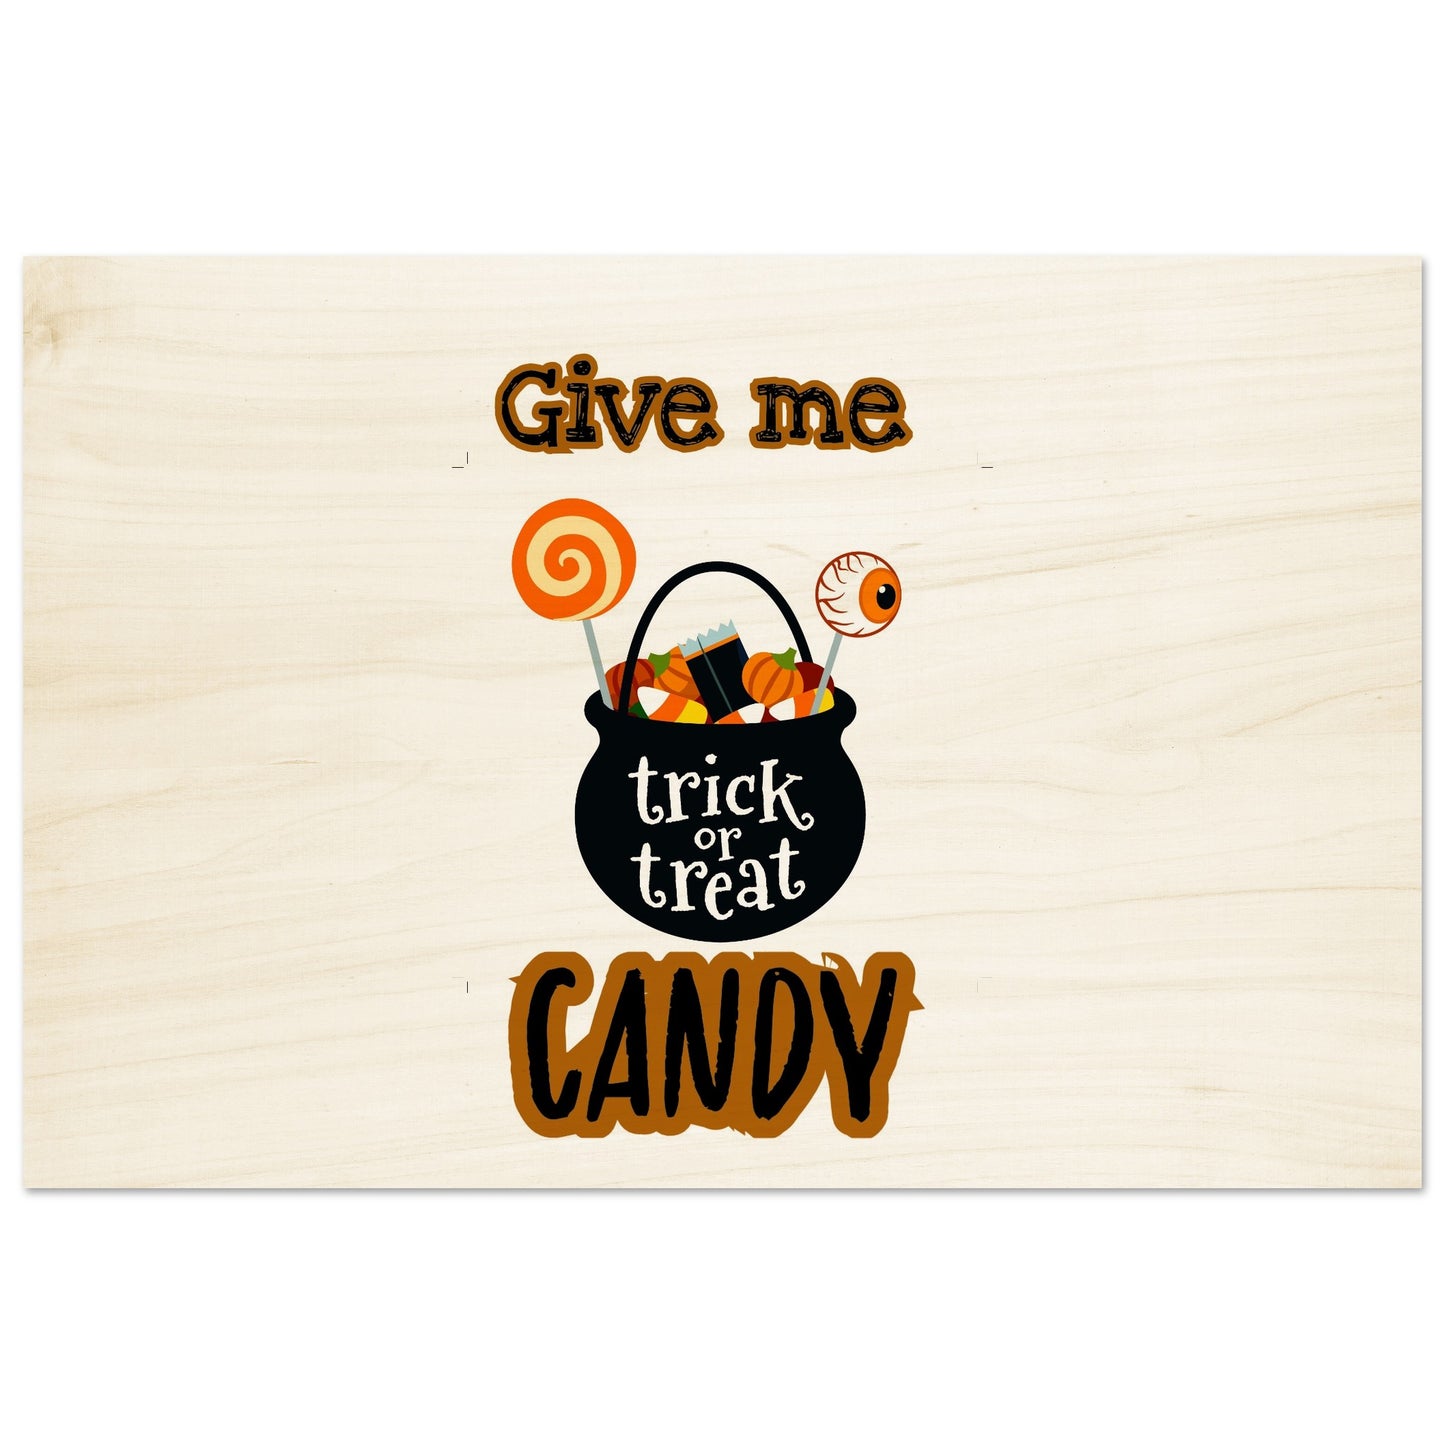 Give me candy -Wood Prints